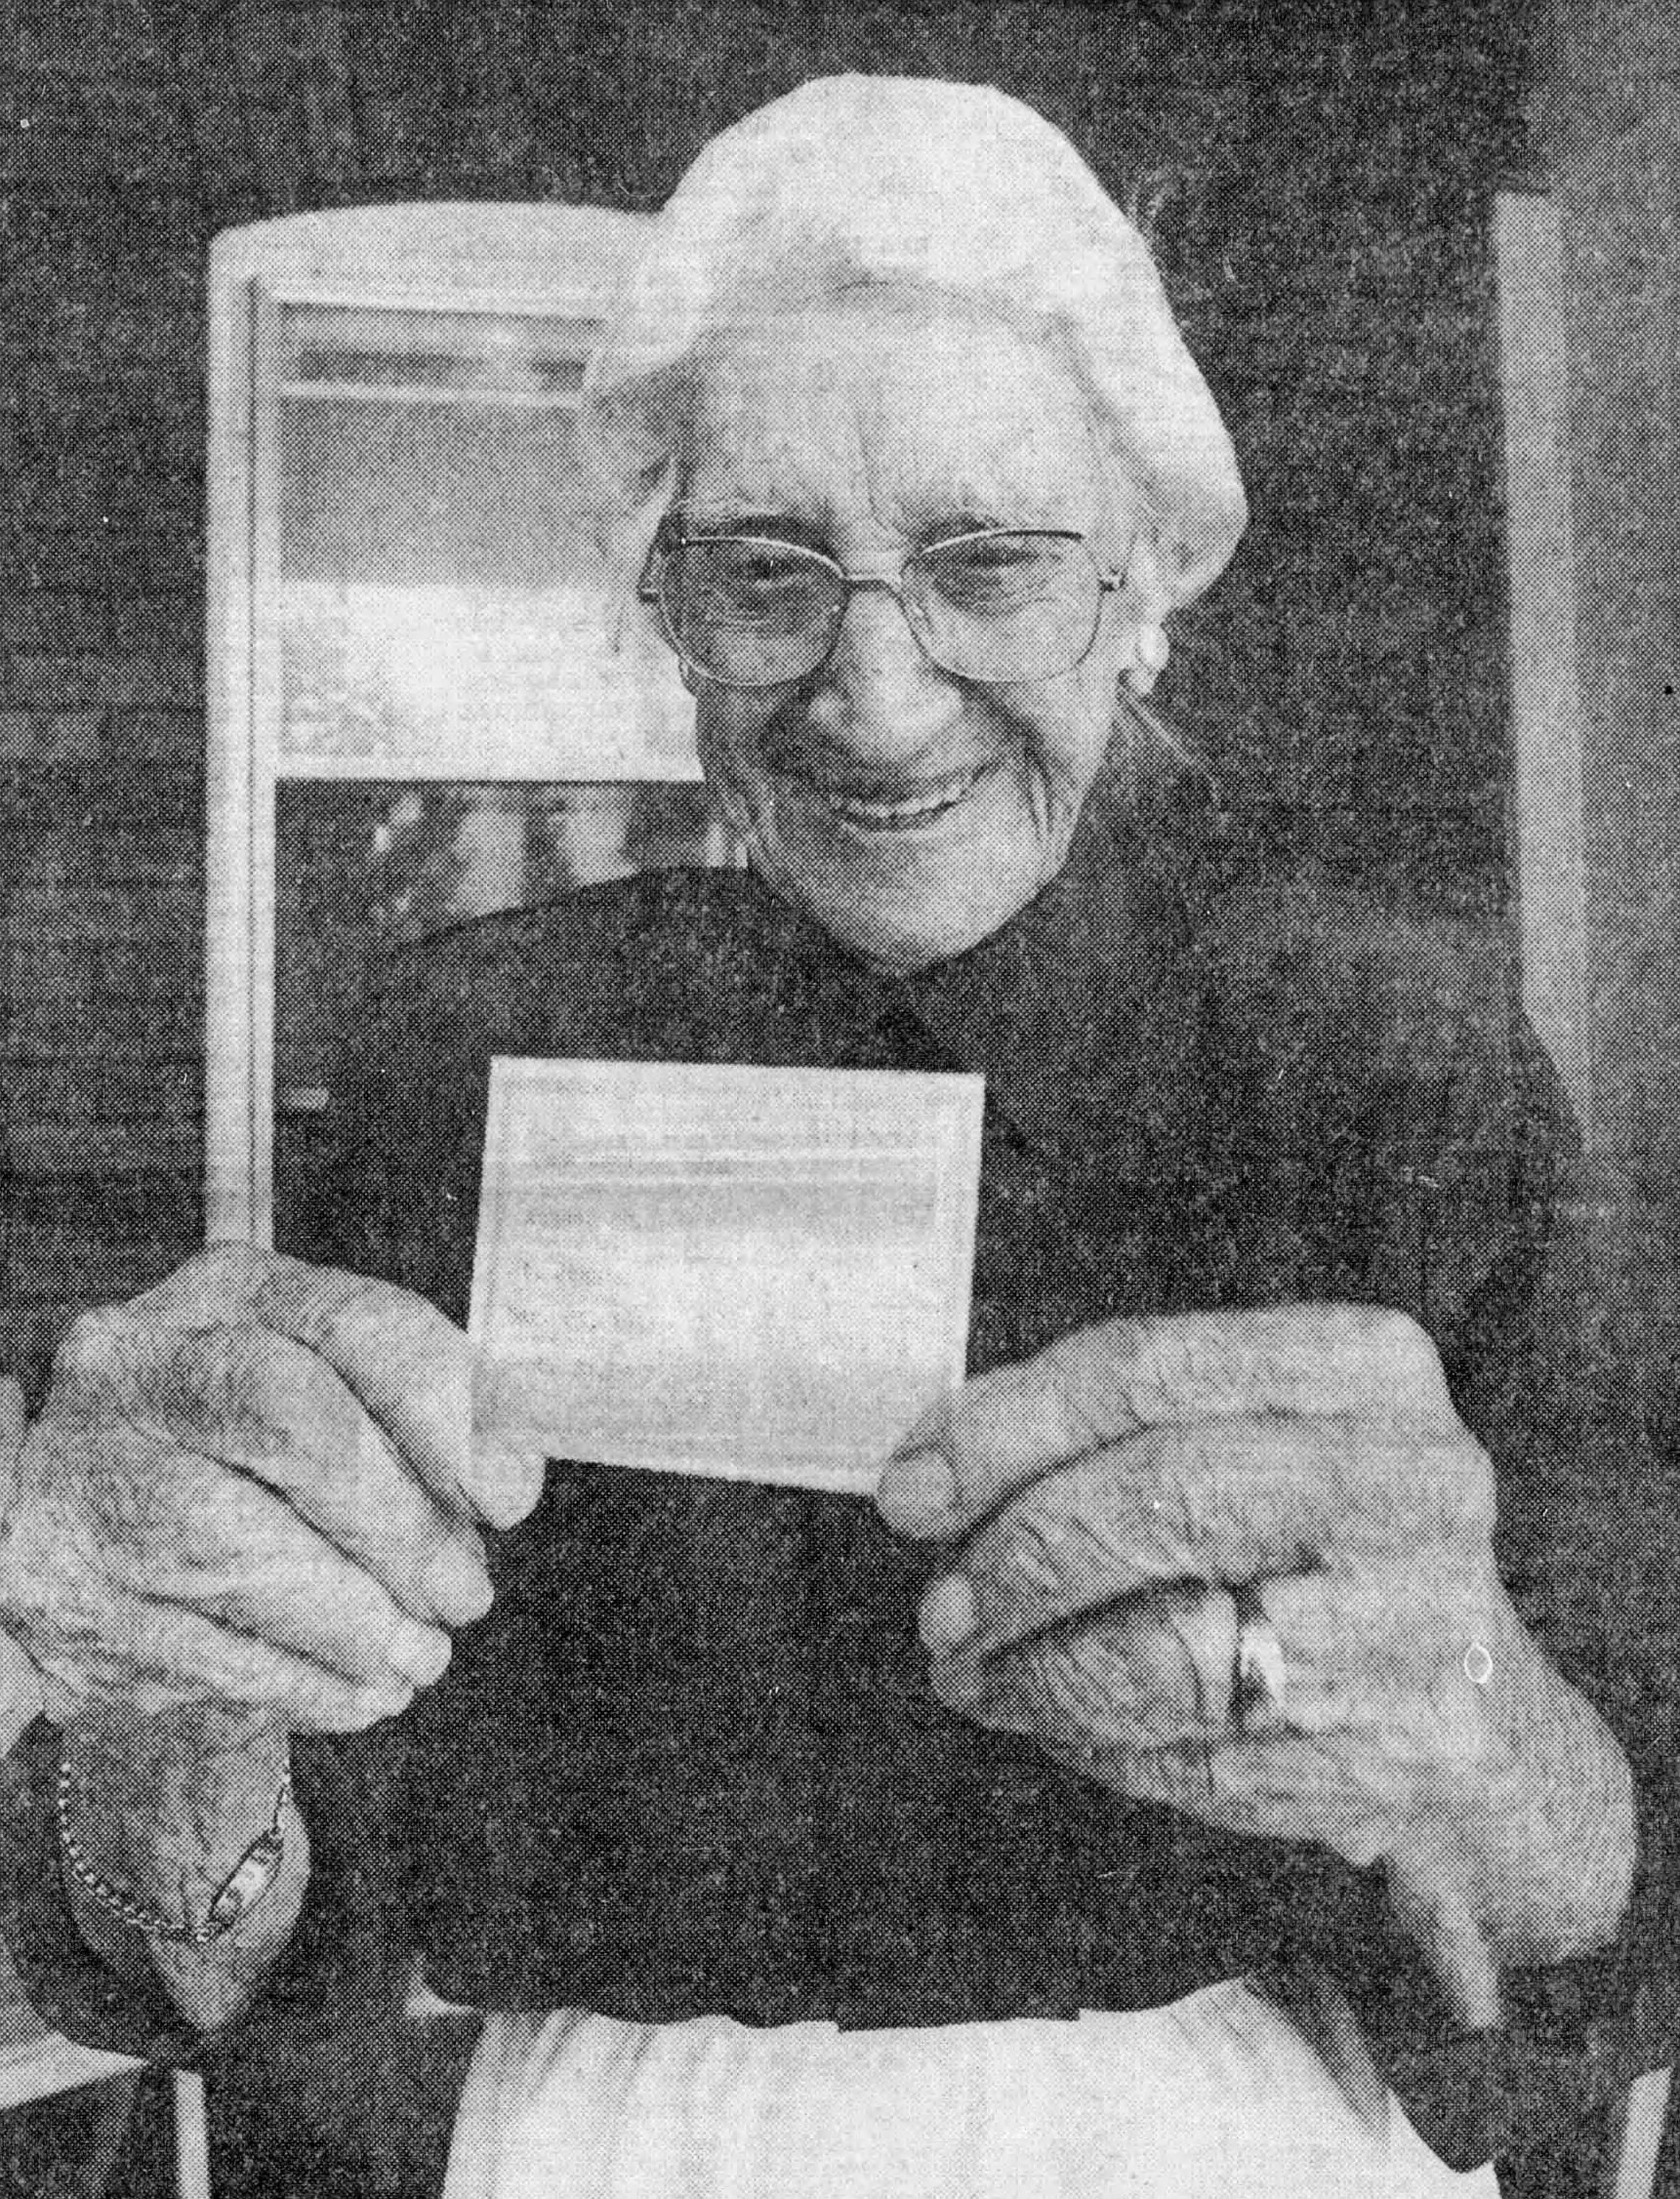 On her 110th birthday, holding a copy of her birth certificate. (Source: The Toronto Star)